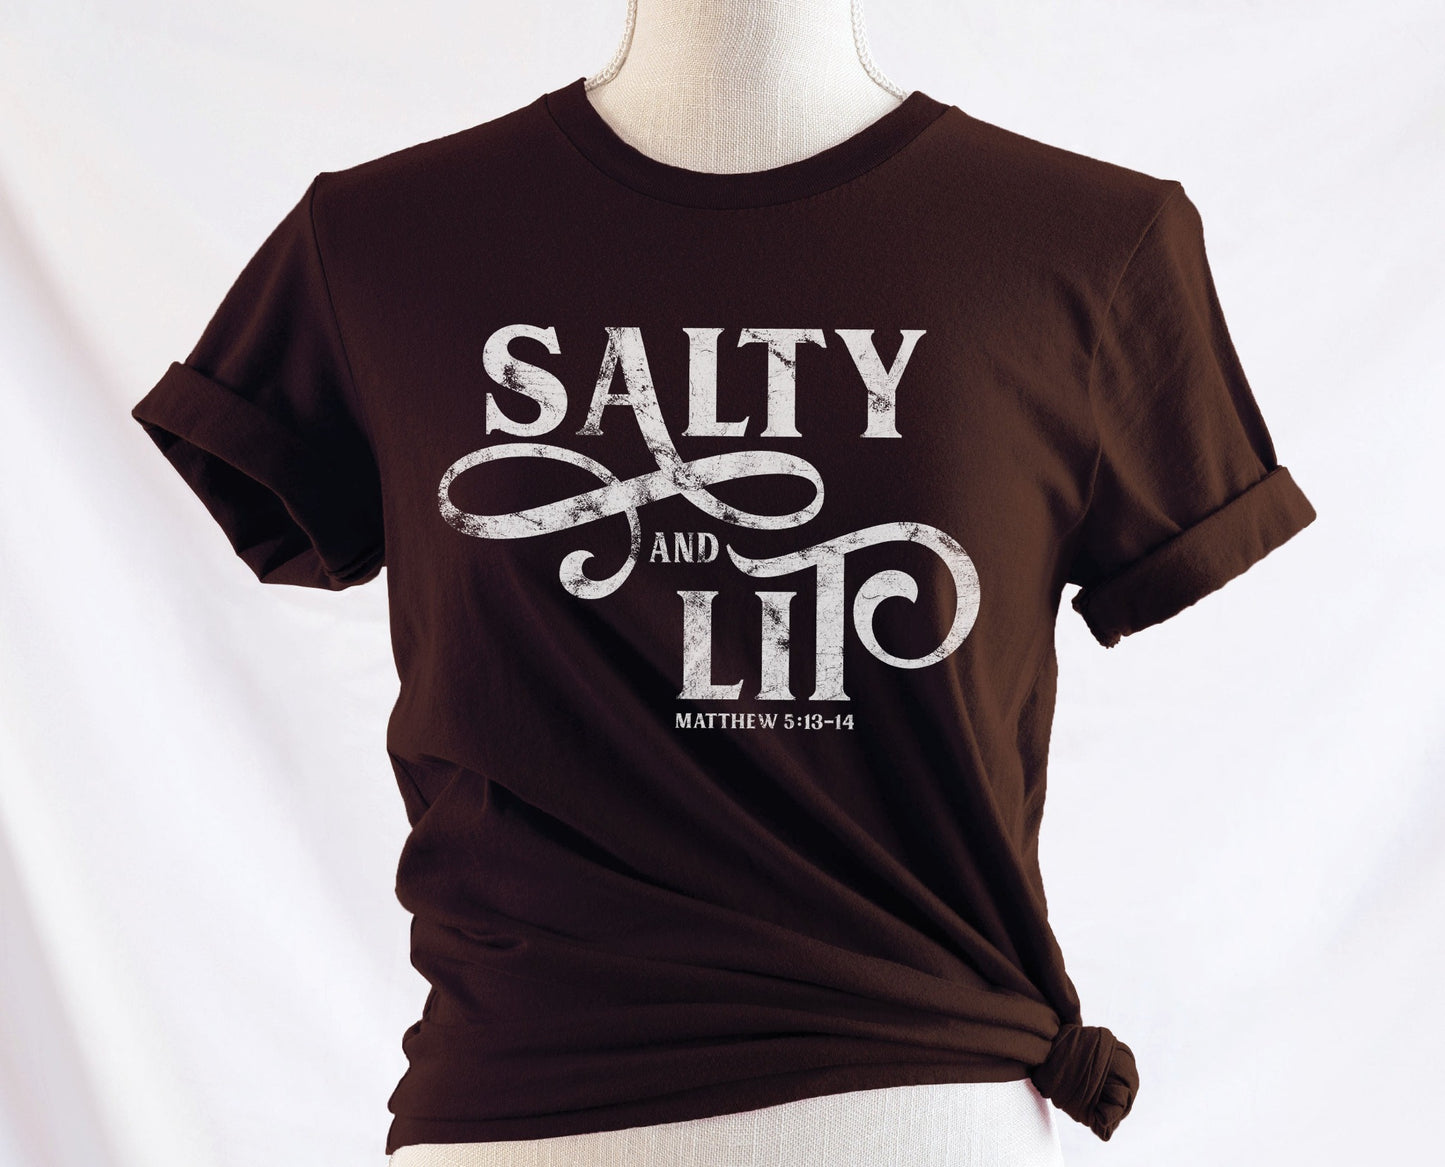 Salty And Lit Matthew 5:13-14 bible verse funny Christian T-Shirt design printed in white on soft mocha brown tee for women